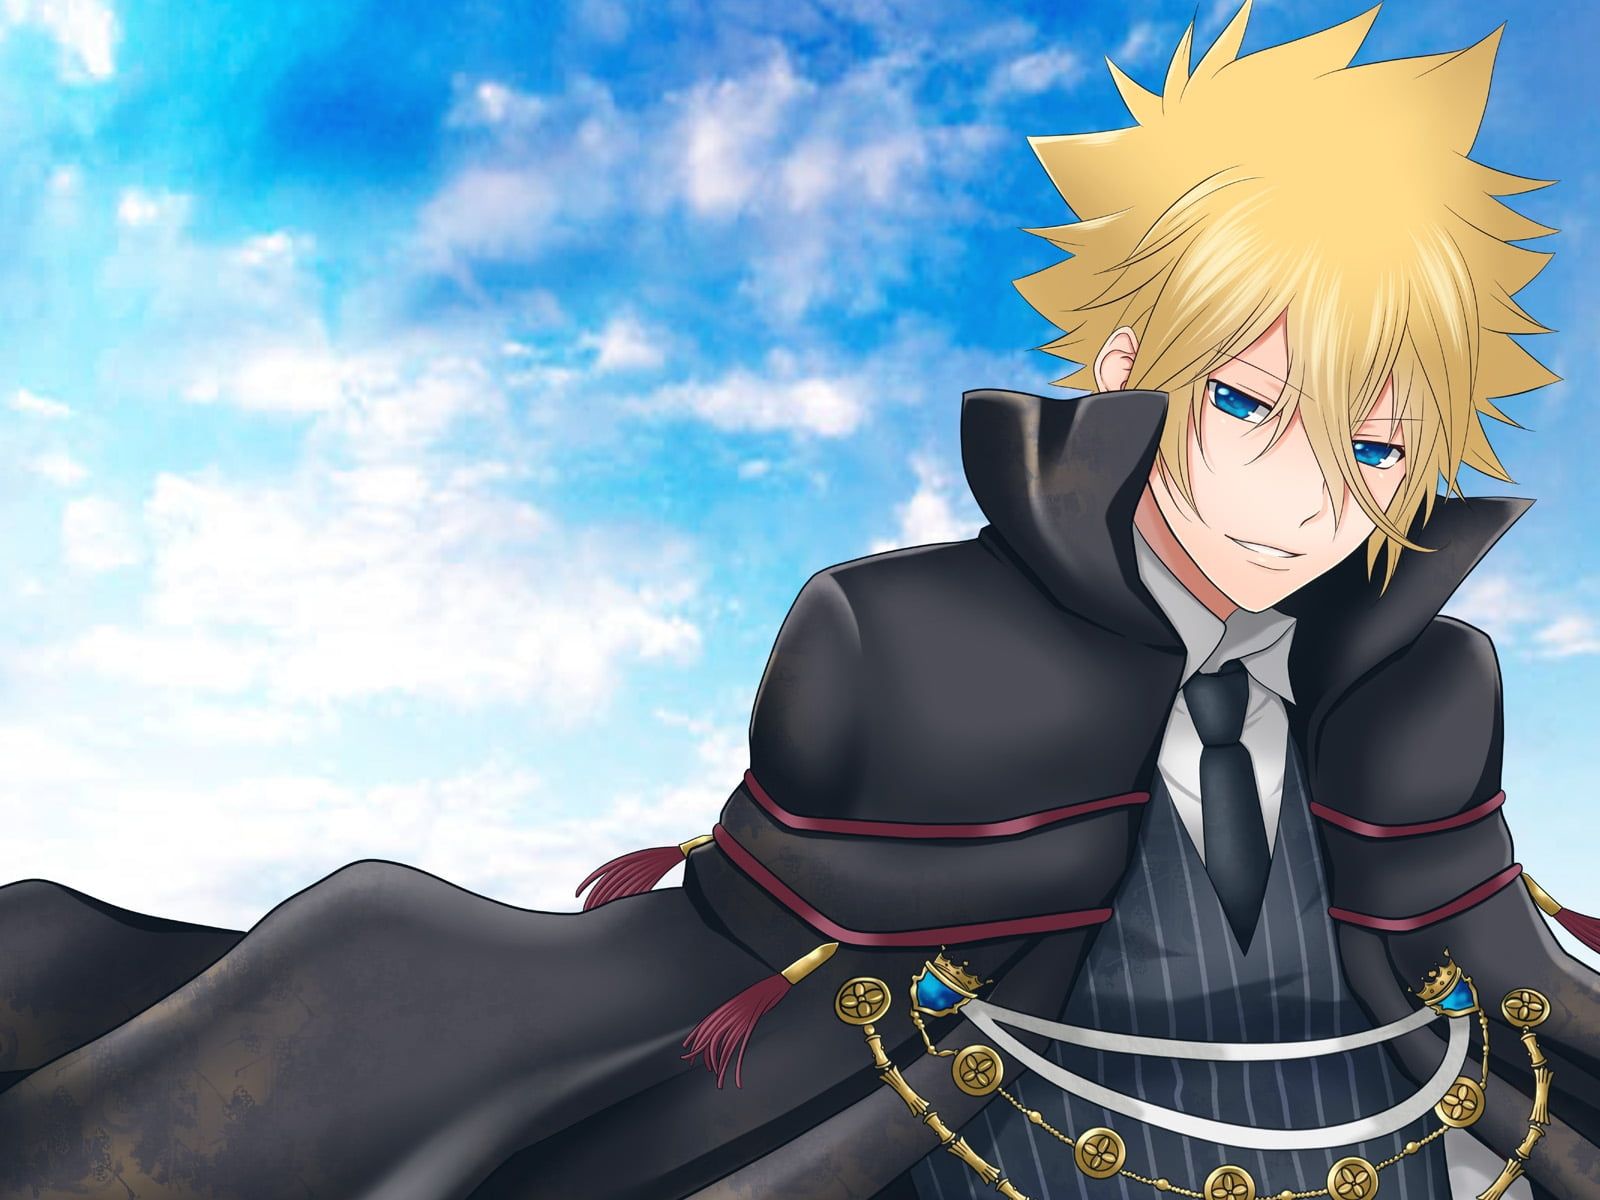 blonde anime male wallpapers wallpaper cave blonde anime male wallpapers